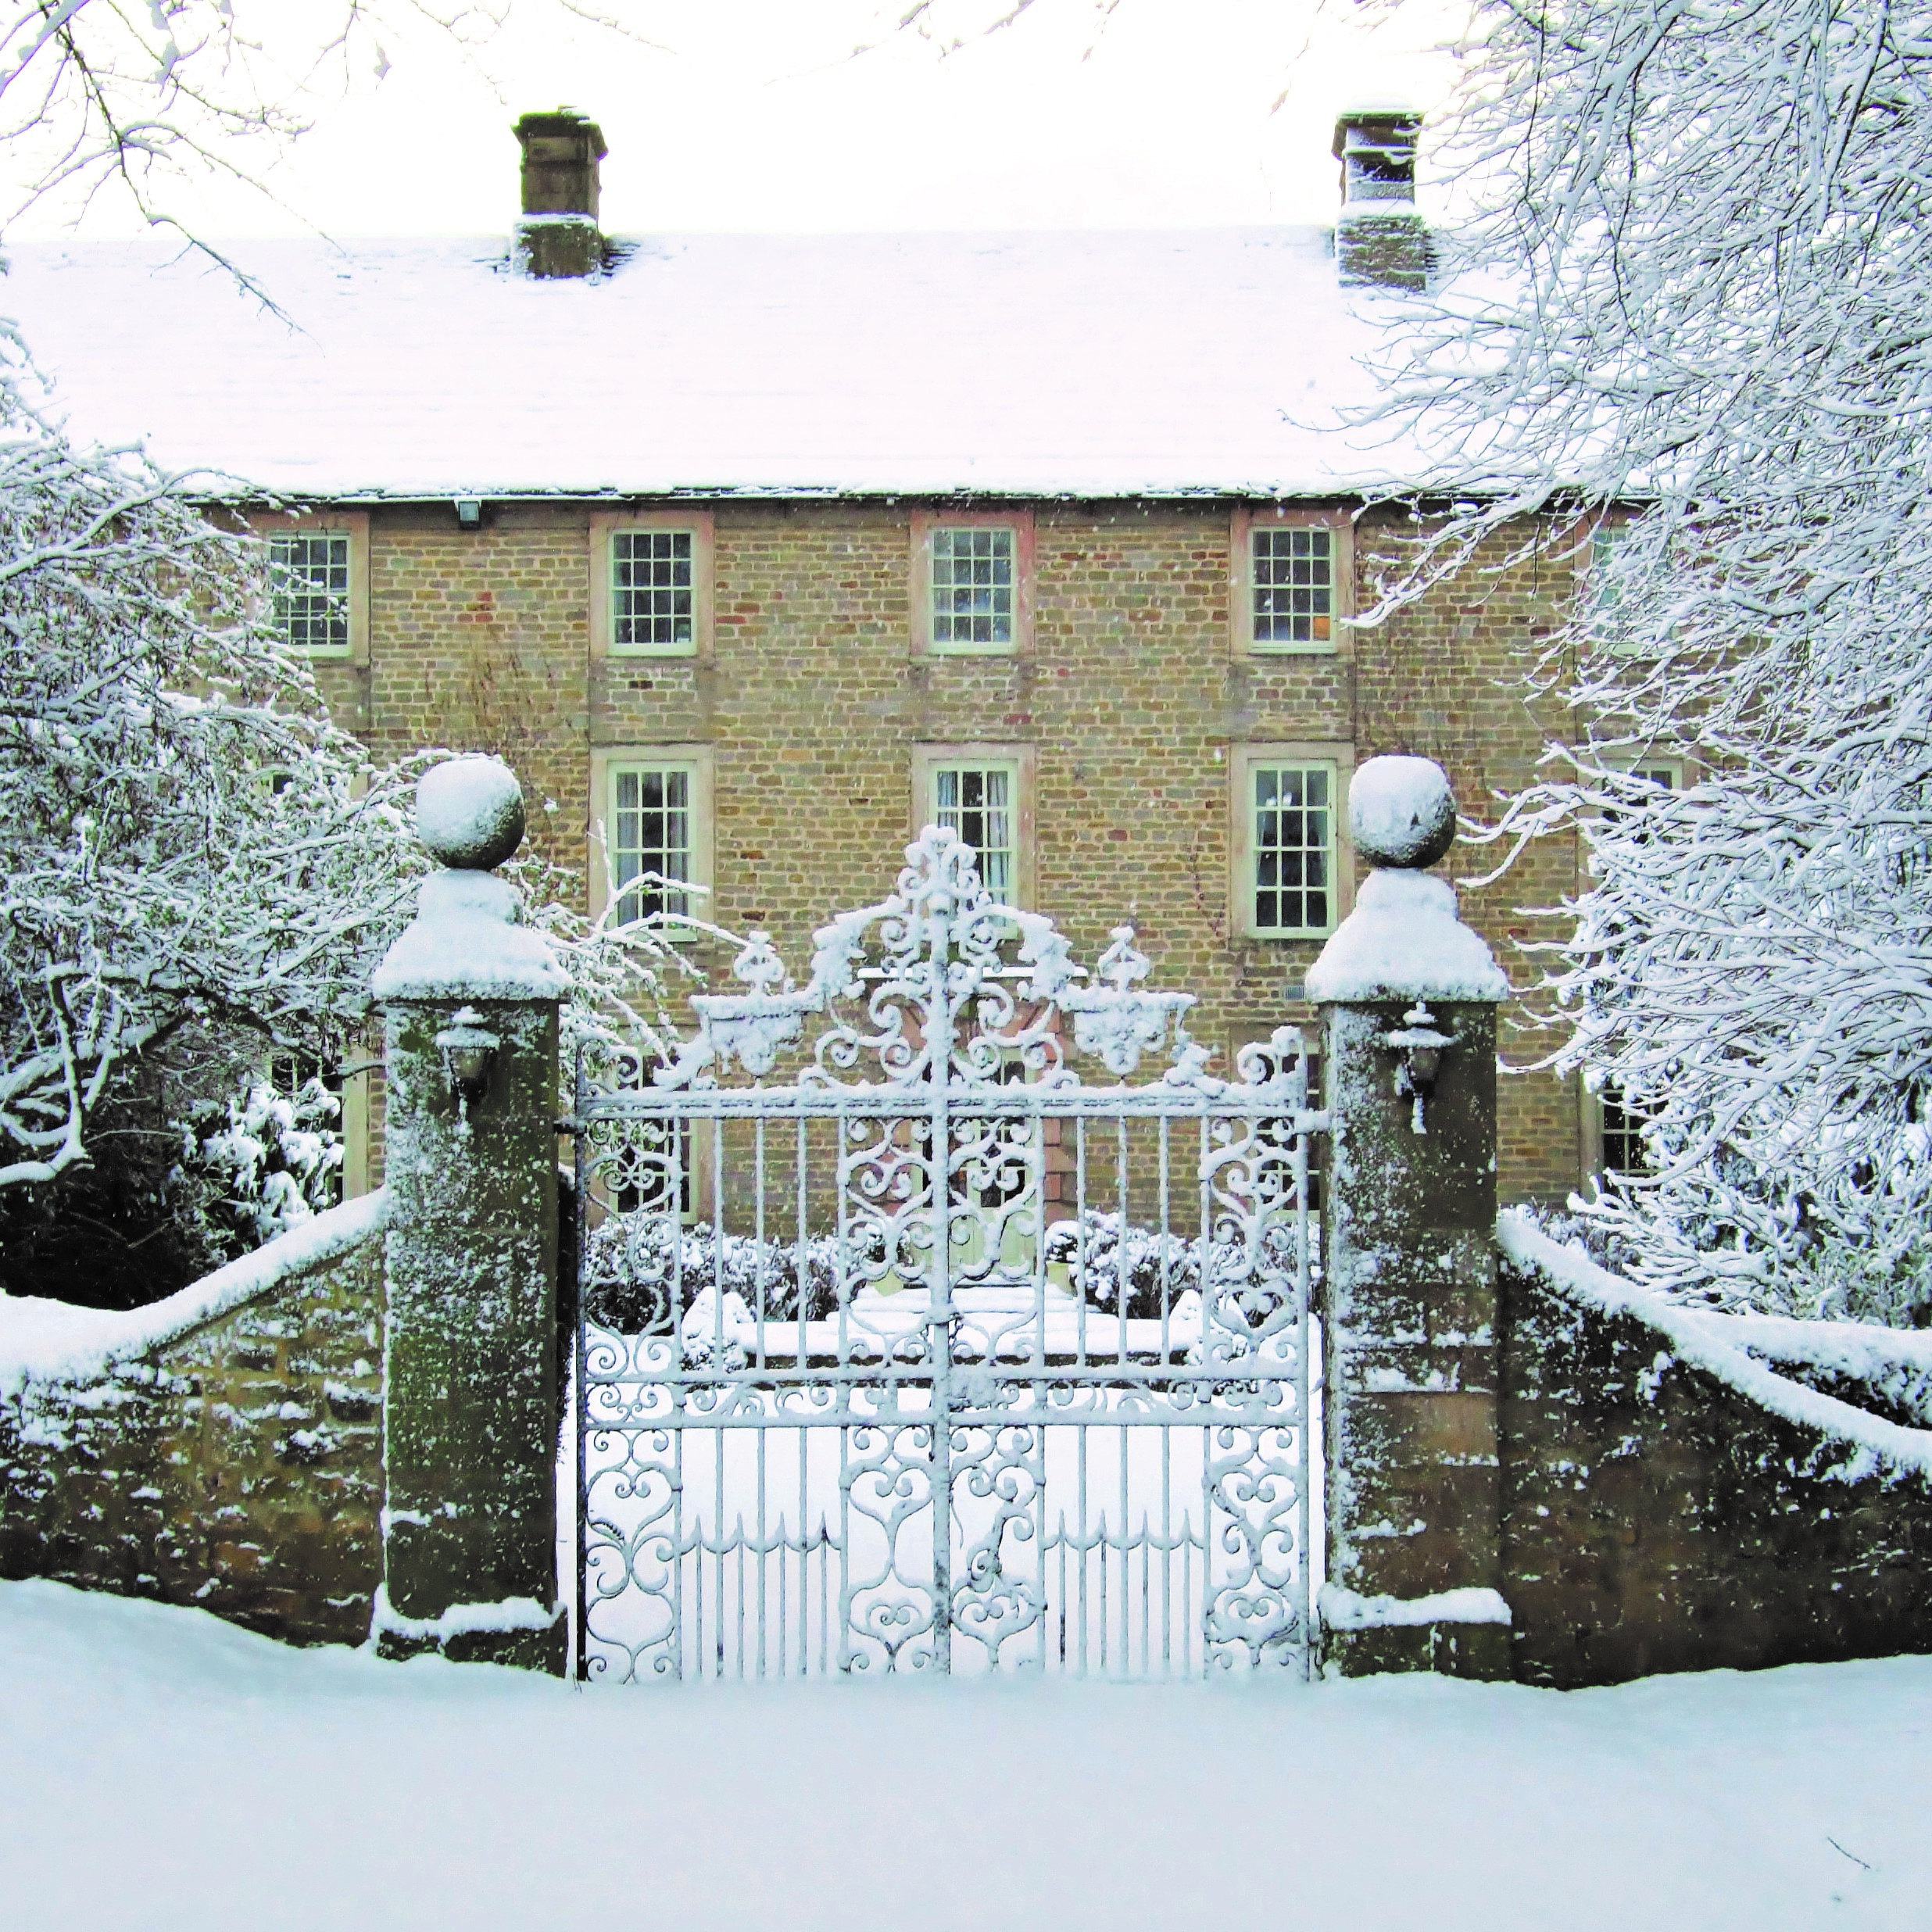 Things to do over the Christmas season in County Durham